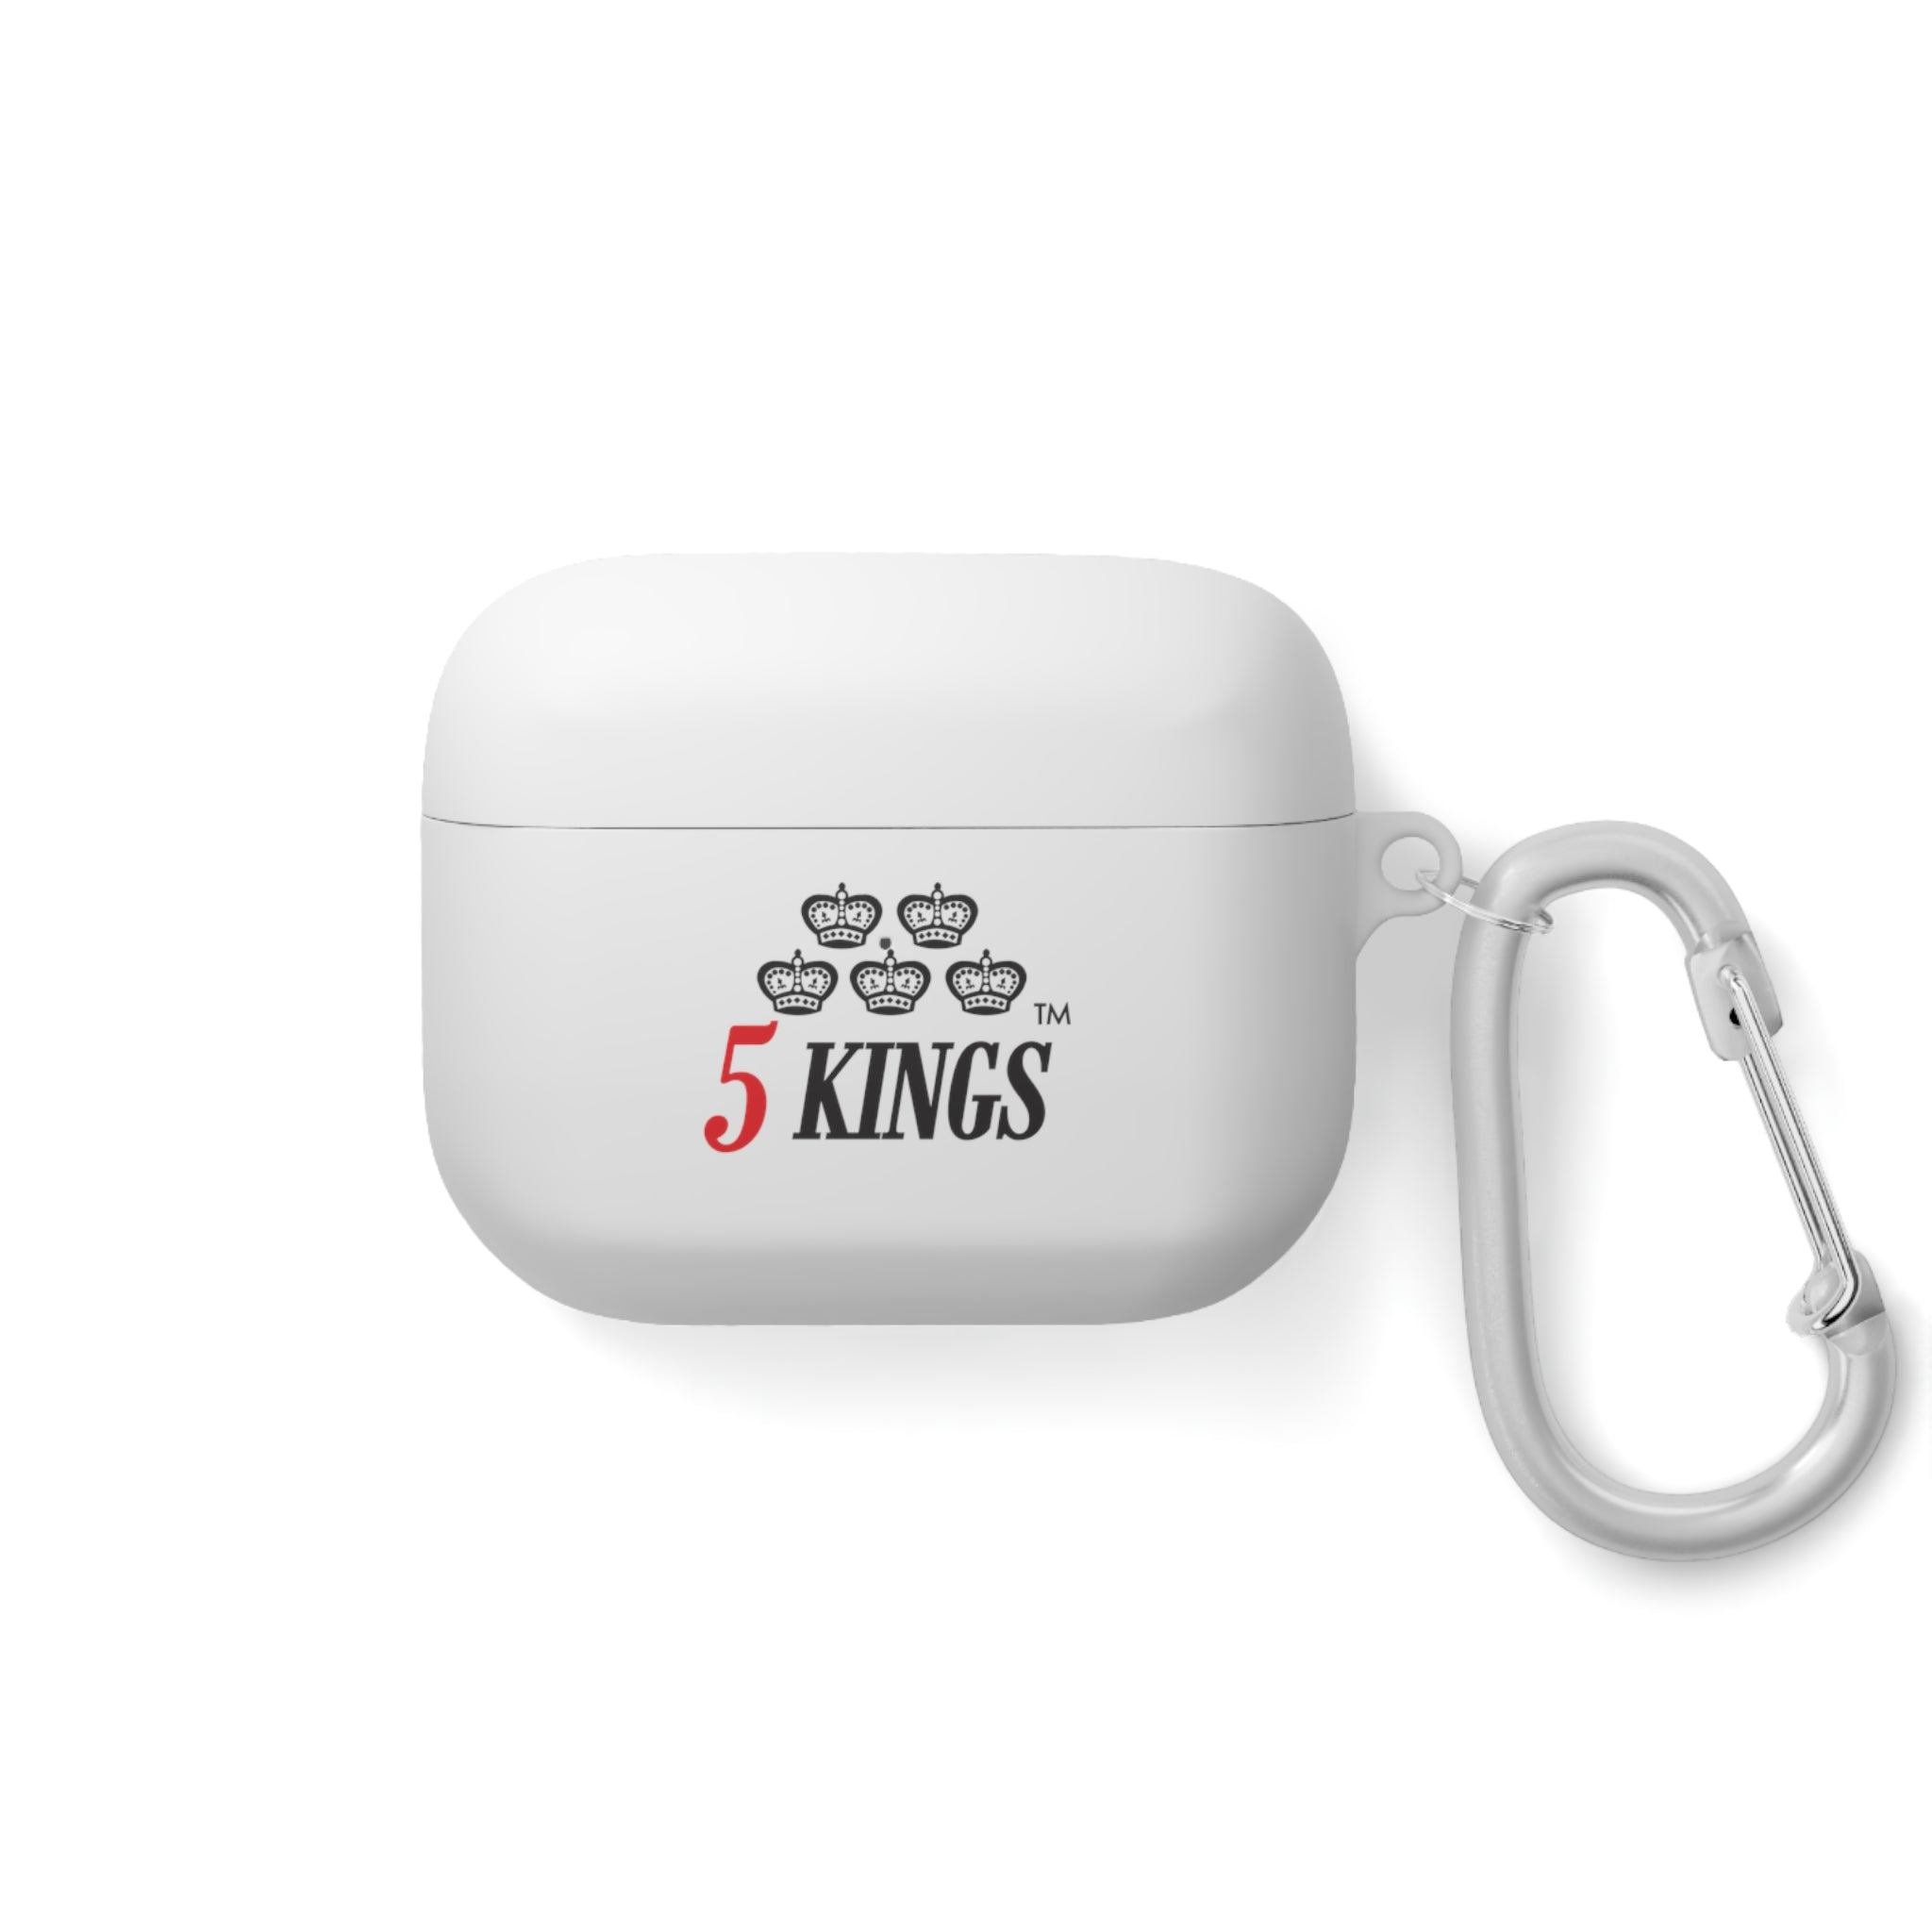 5 KINGS AirPods Pro Case Cover